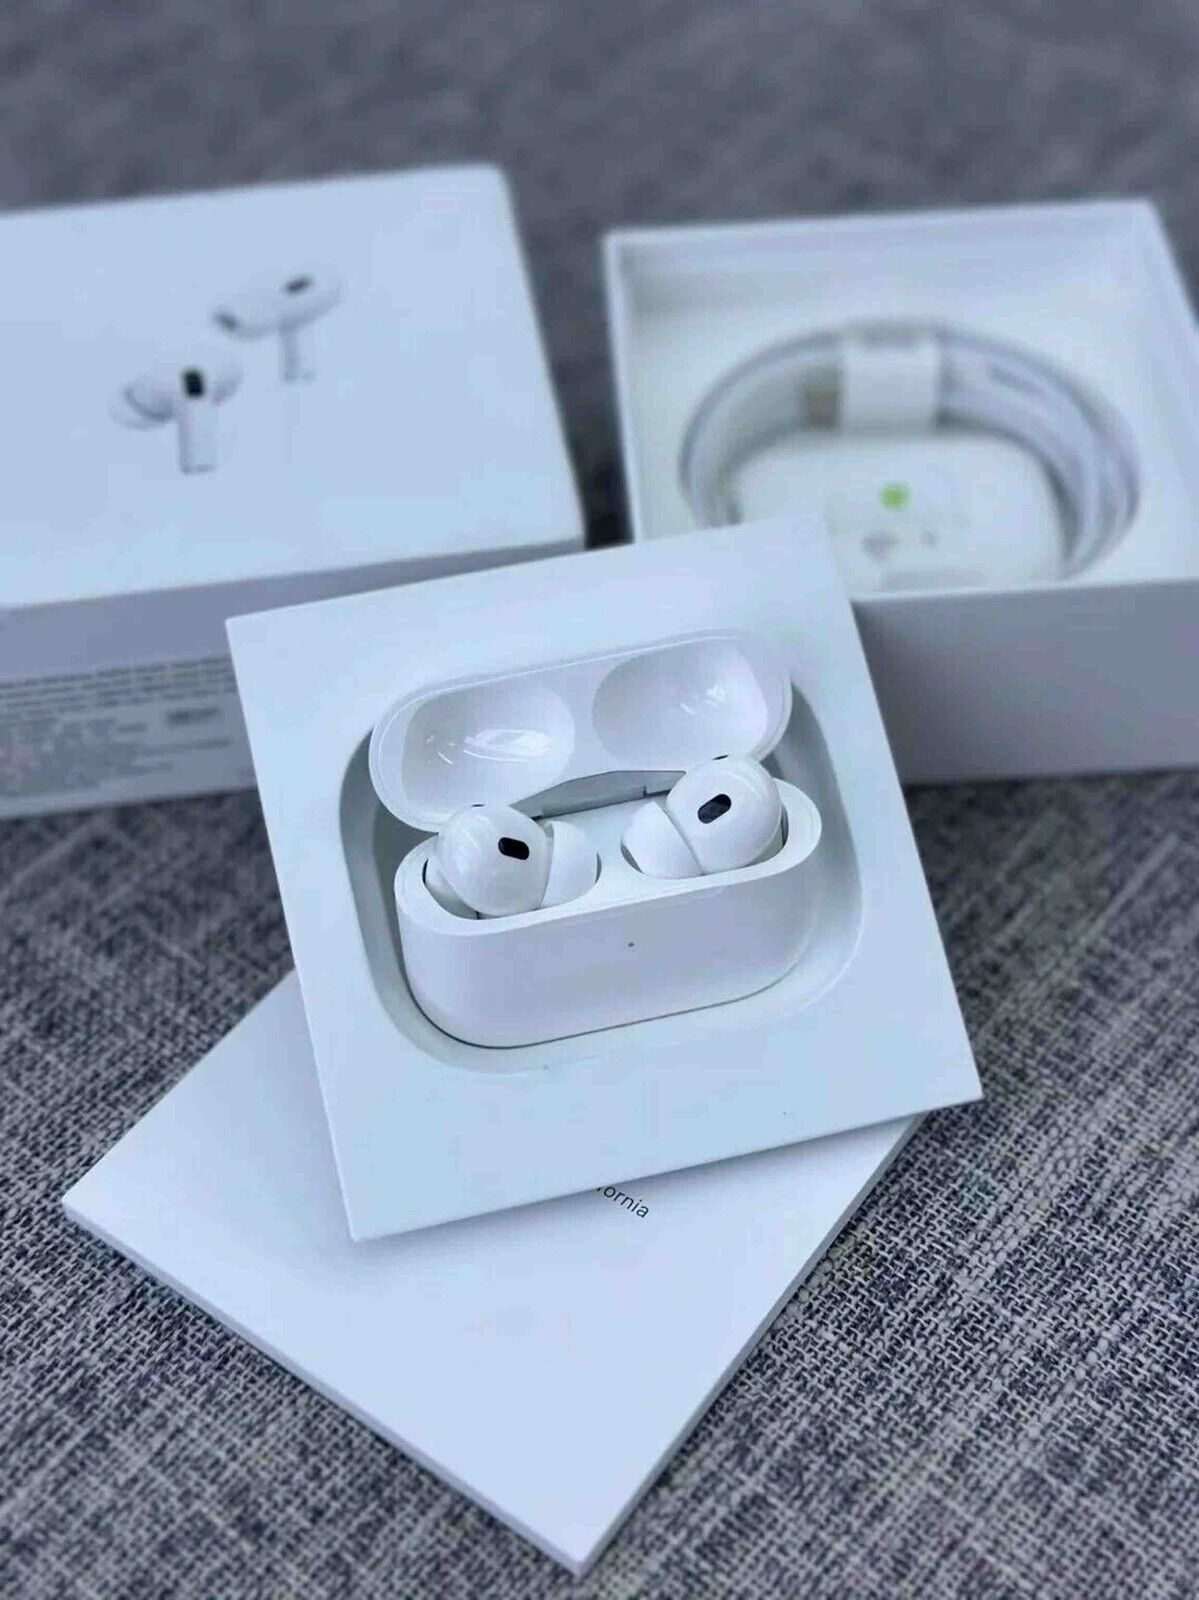 New Apple AirPods Pro 2nd Generation Wireless Earbuds with MagSafe Charging Case